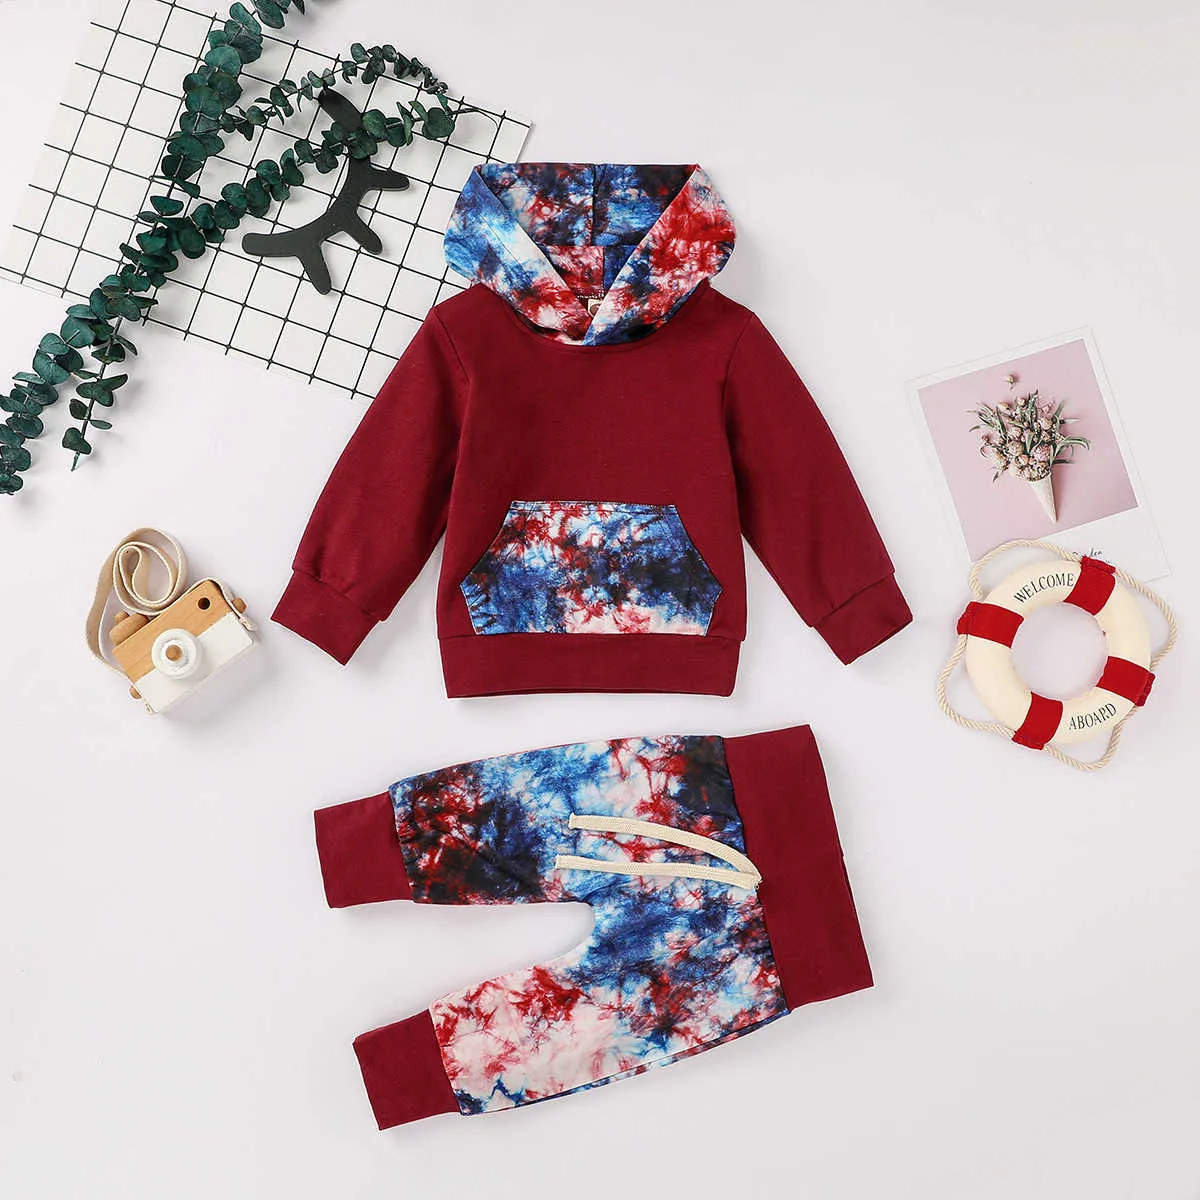 Bear Leader born Baby Girl Clothes Hooded Sweatshirt Tie-dye Pants 2pcs Outfit Cotton Baby Tracksuit Set Infant Boys Clothes 210708